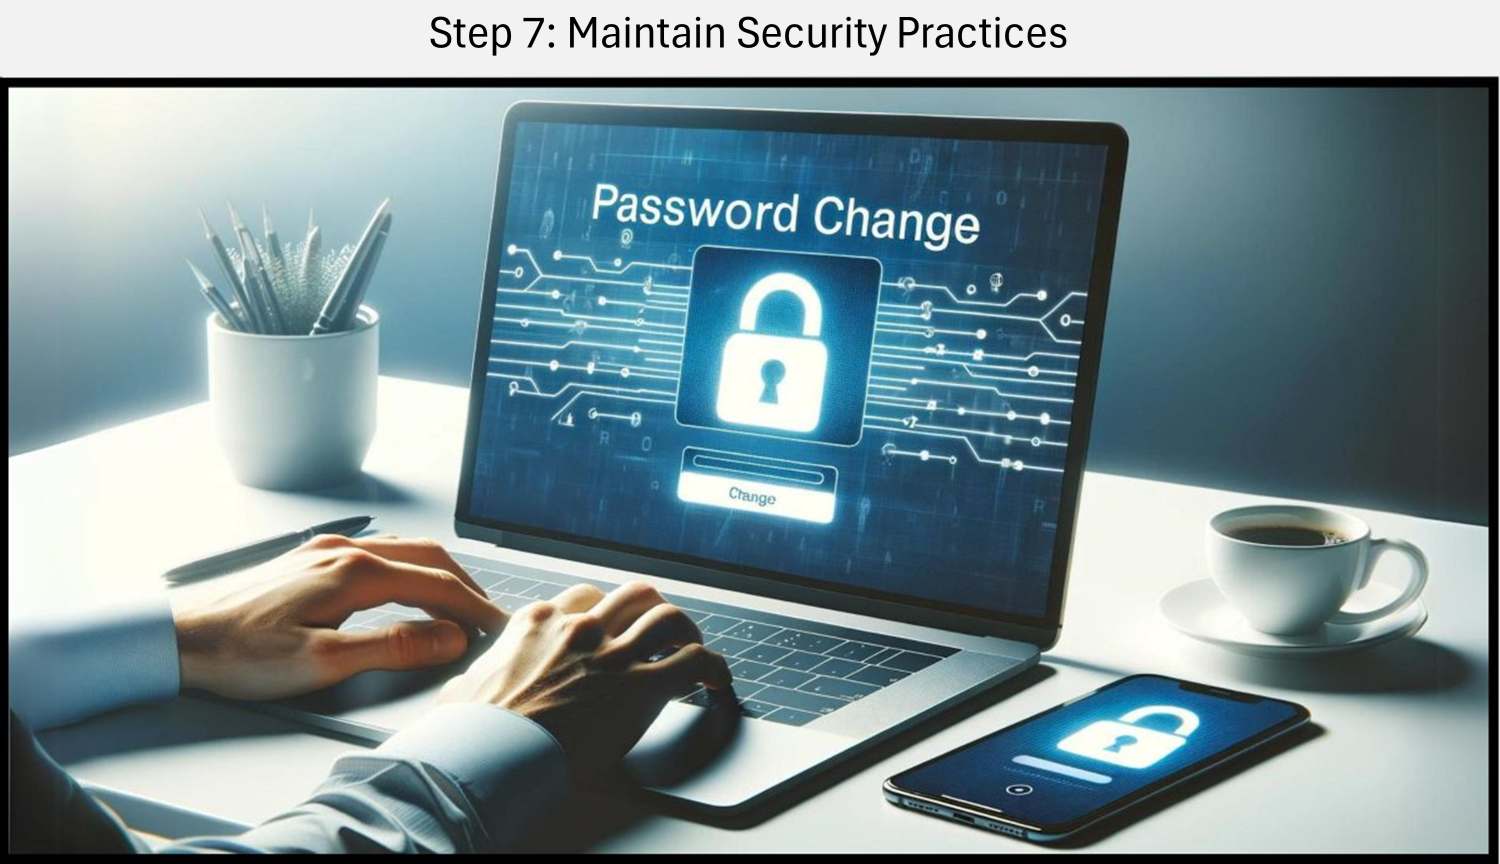 Step 7 Main Security Practices